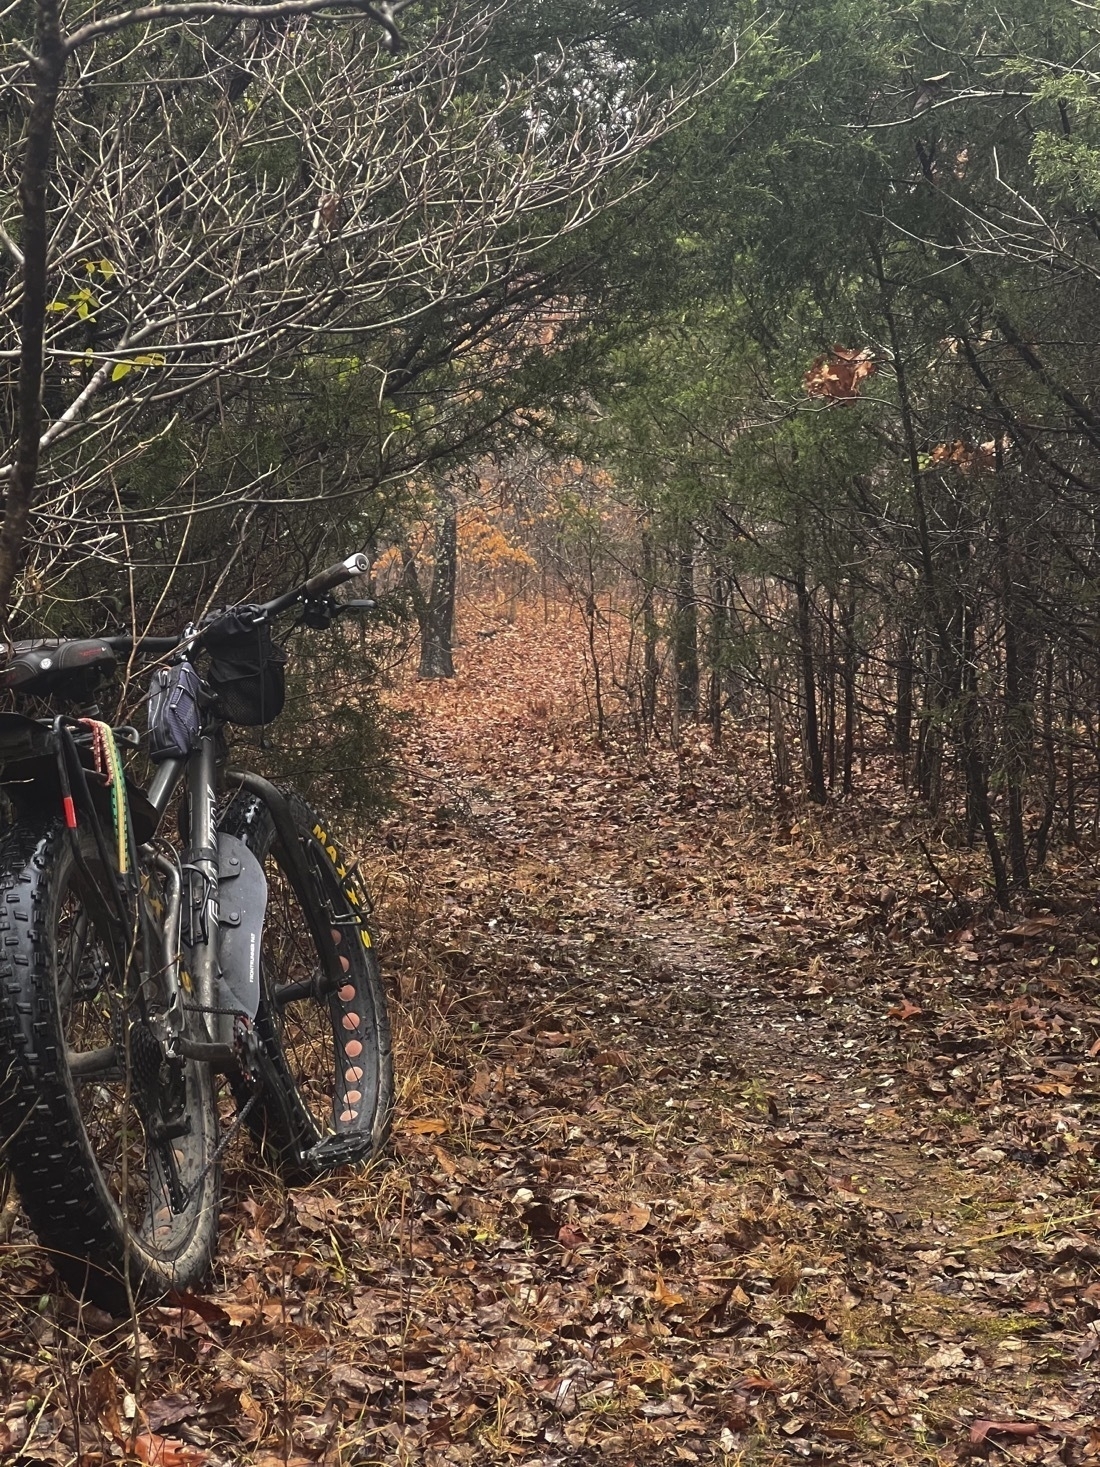 A fat tire bike leans against the tree next to a trail